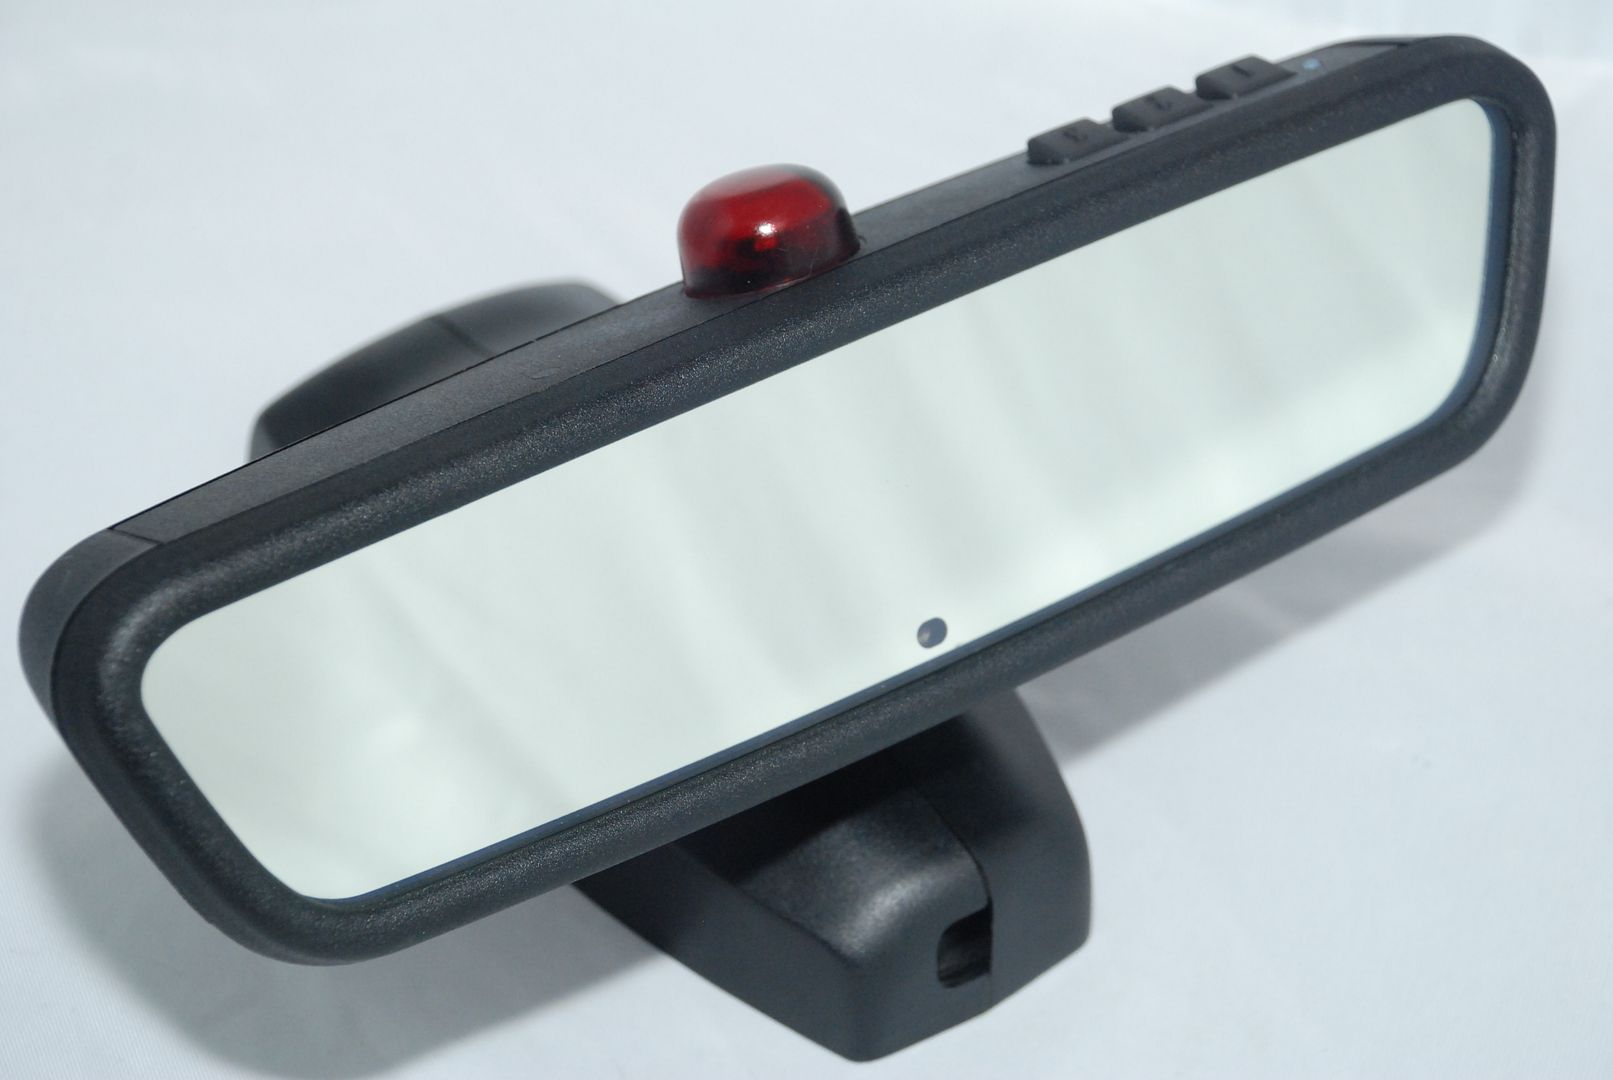 Bmw 325i rear view mirror replacement #3